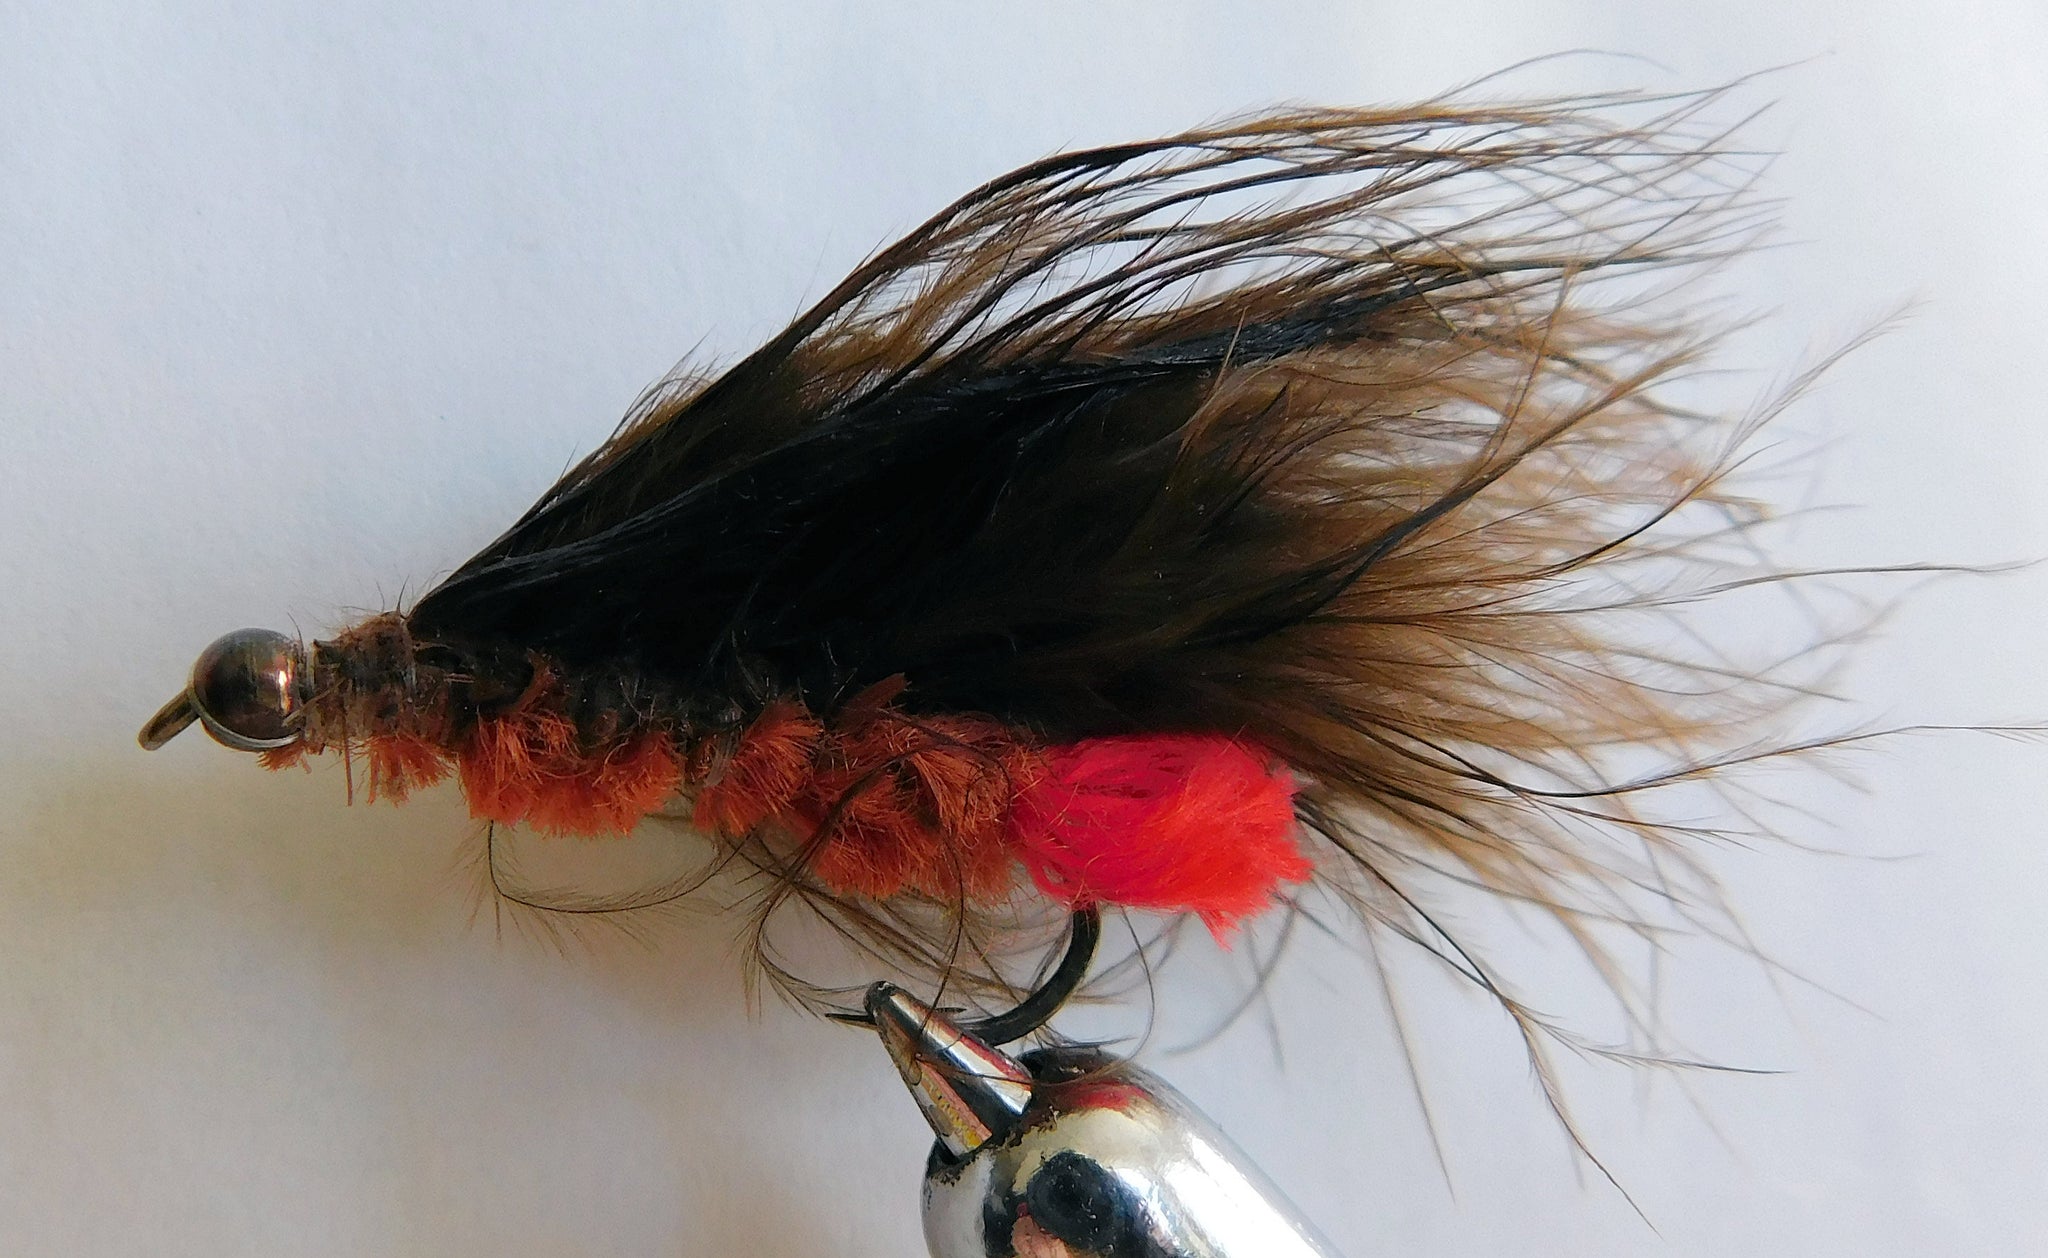 Fly Tying: Proven Flies for the Pacific Northwest